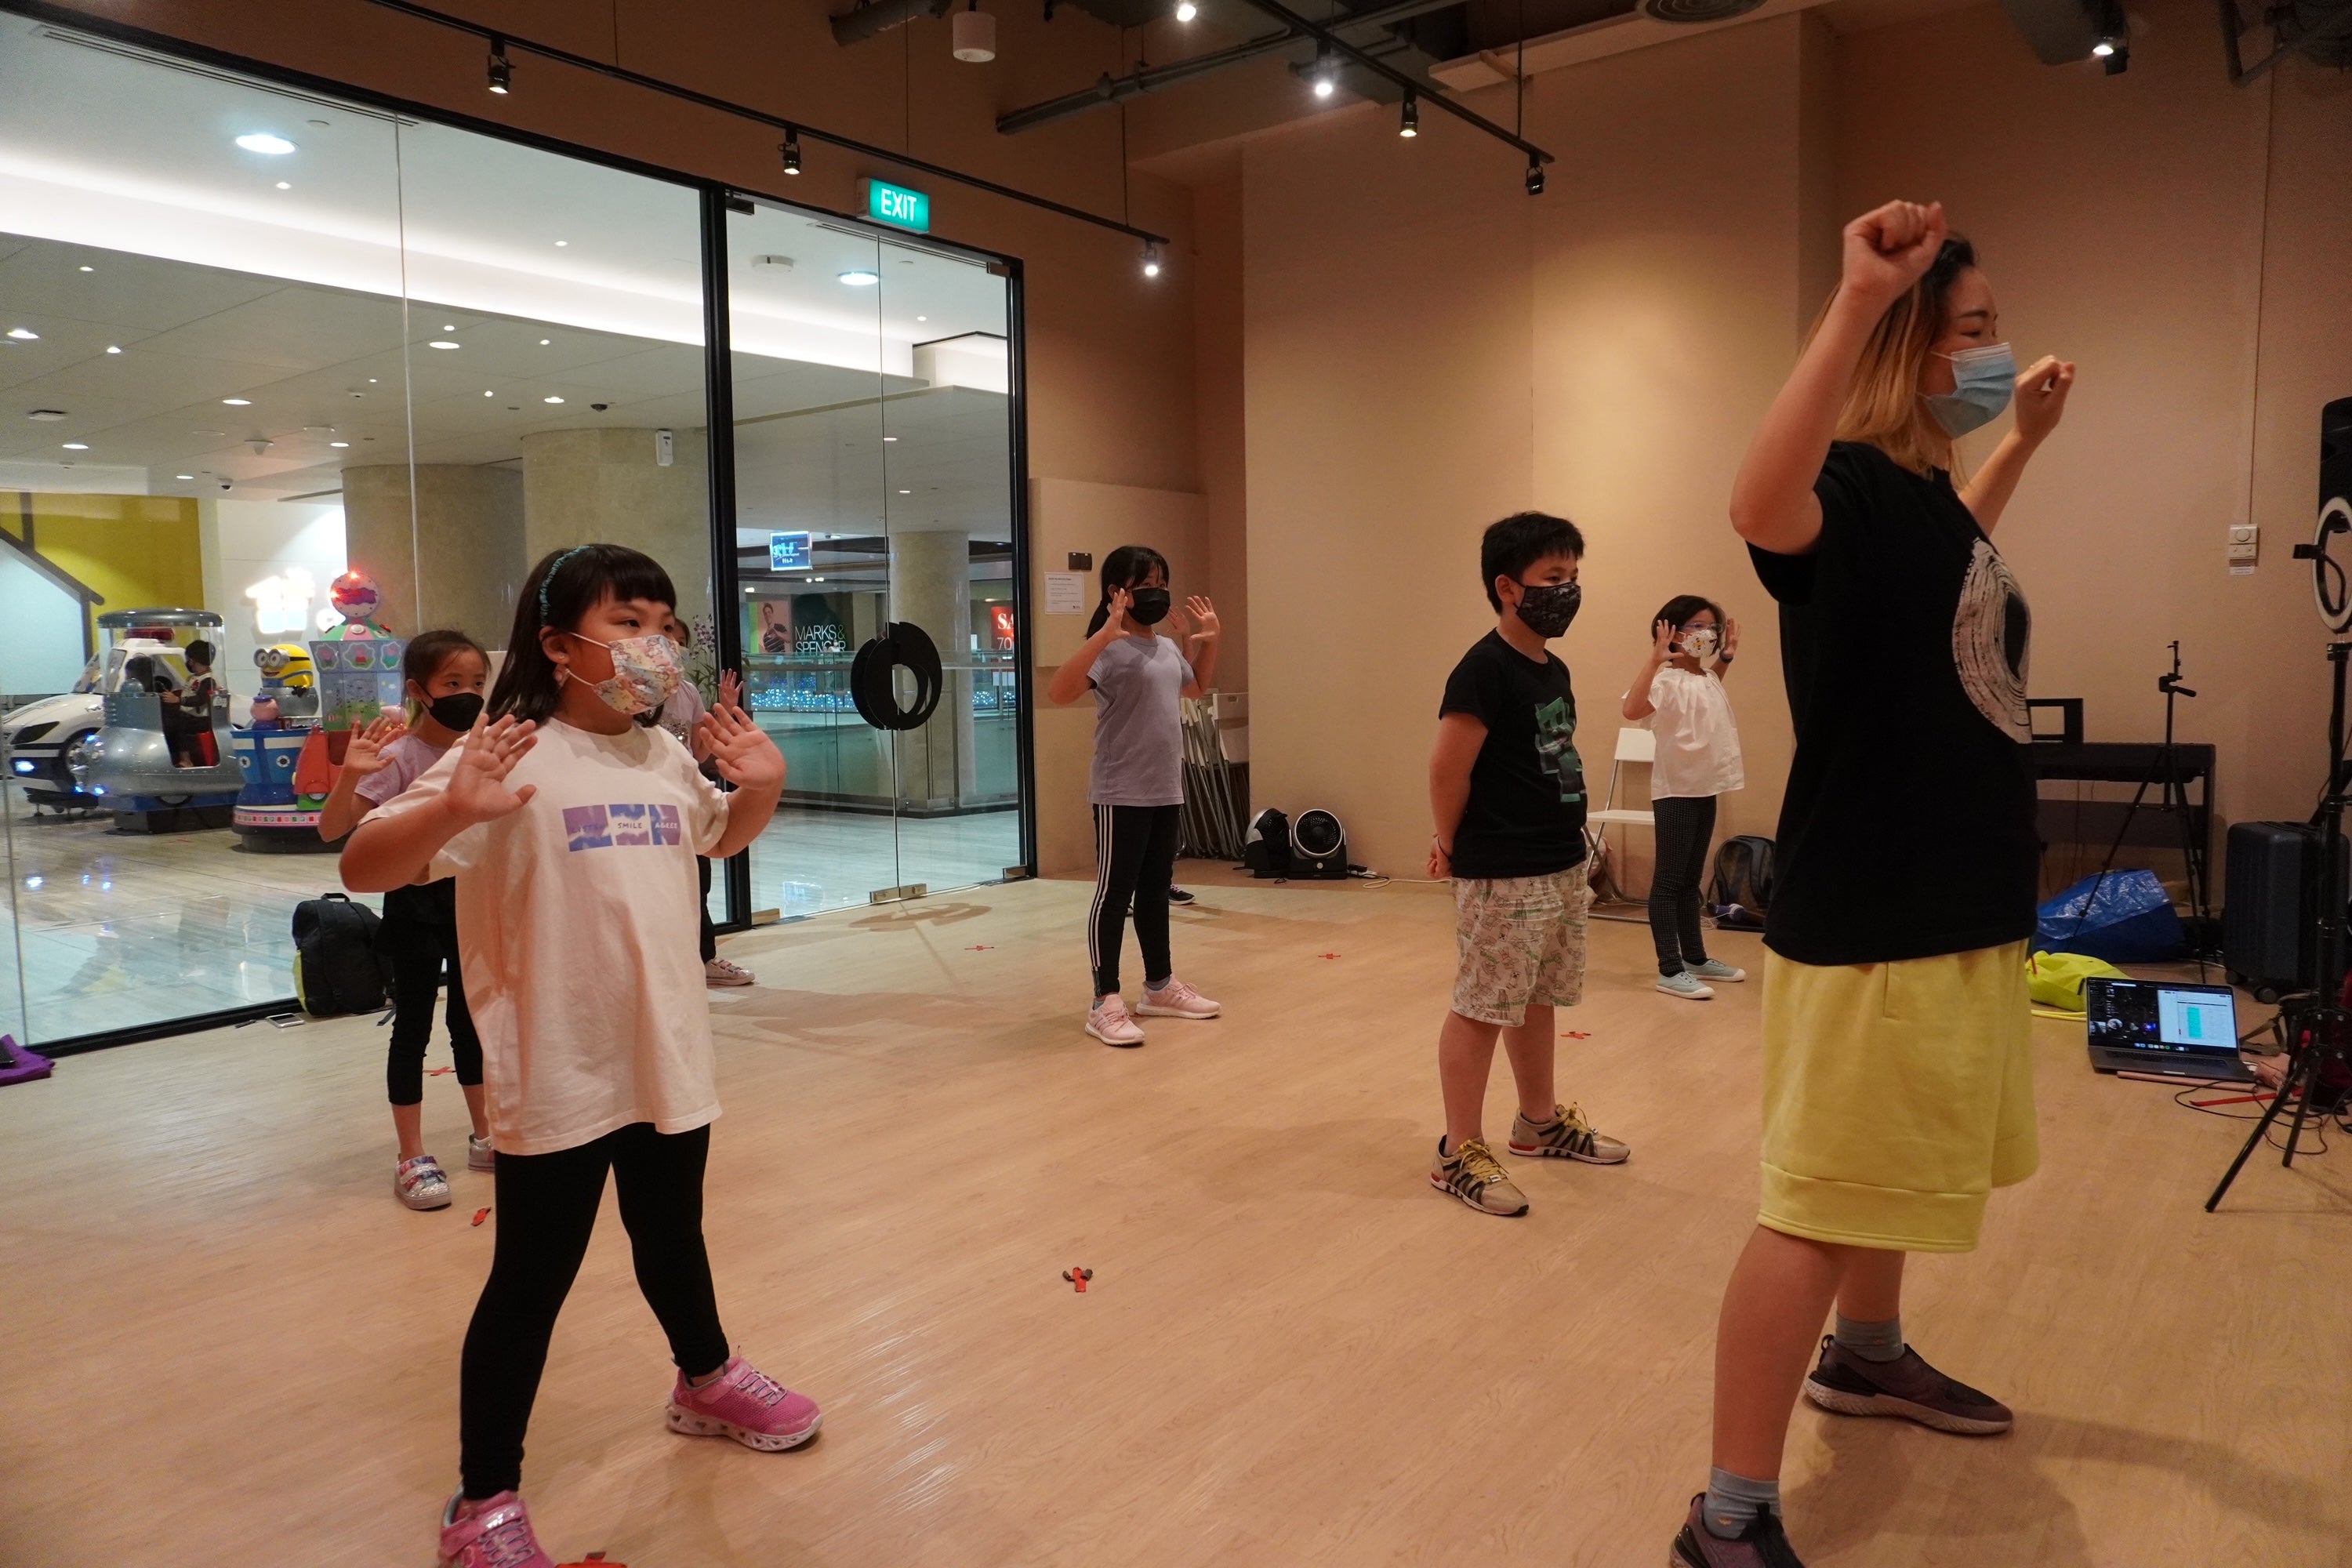 Emerge Arts & Media Academy: Hip Hop Trial Class (7 - 10 Years Old) at $18!